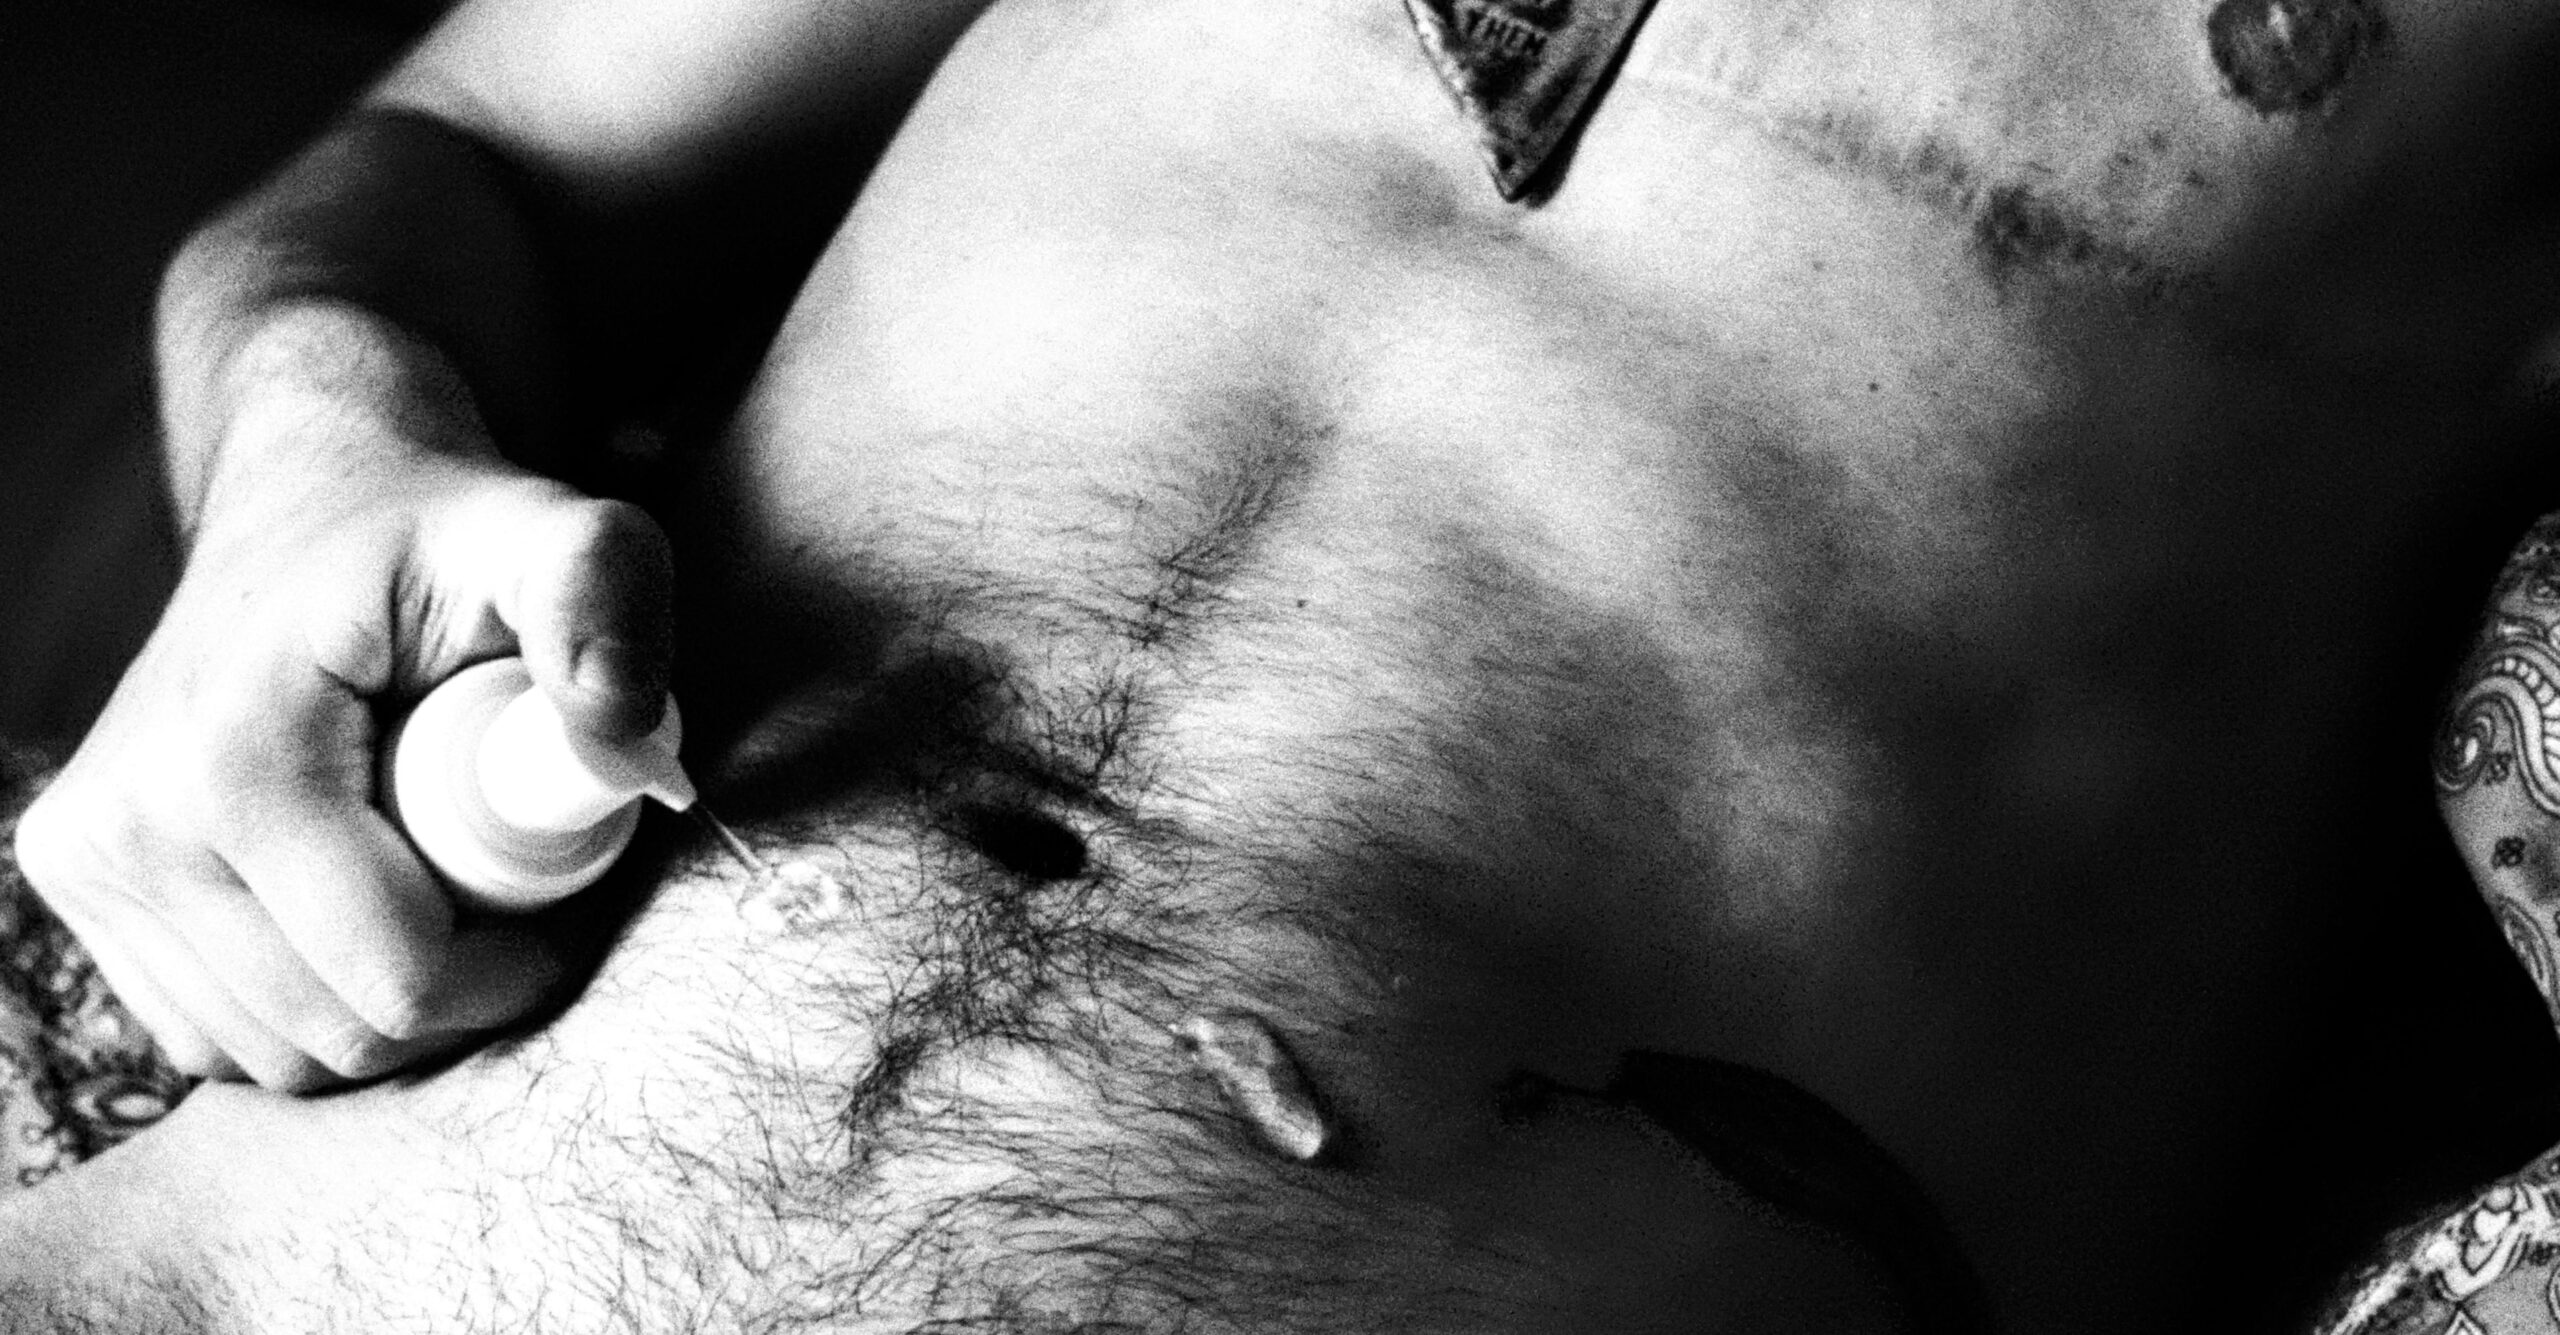 Torso of a trans masculine person applying T-gel on their hairy belly.